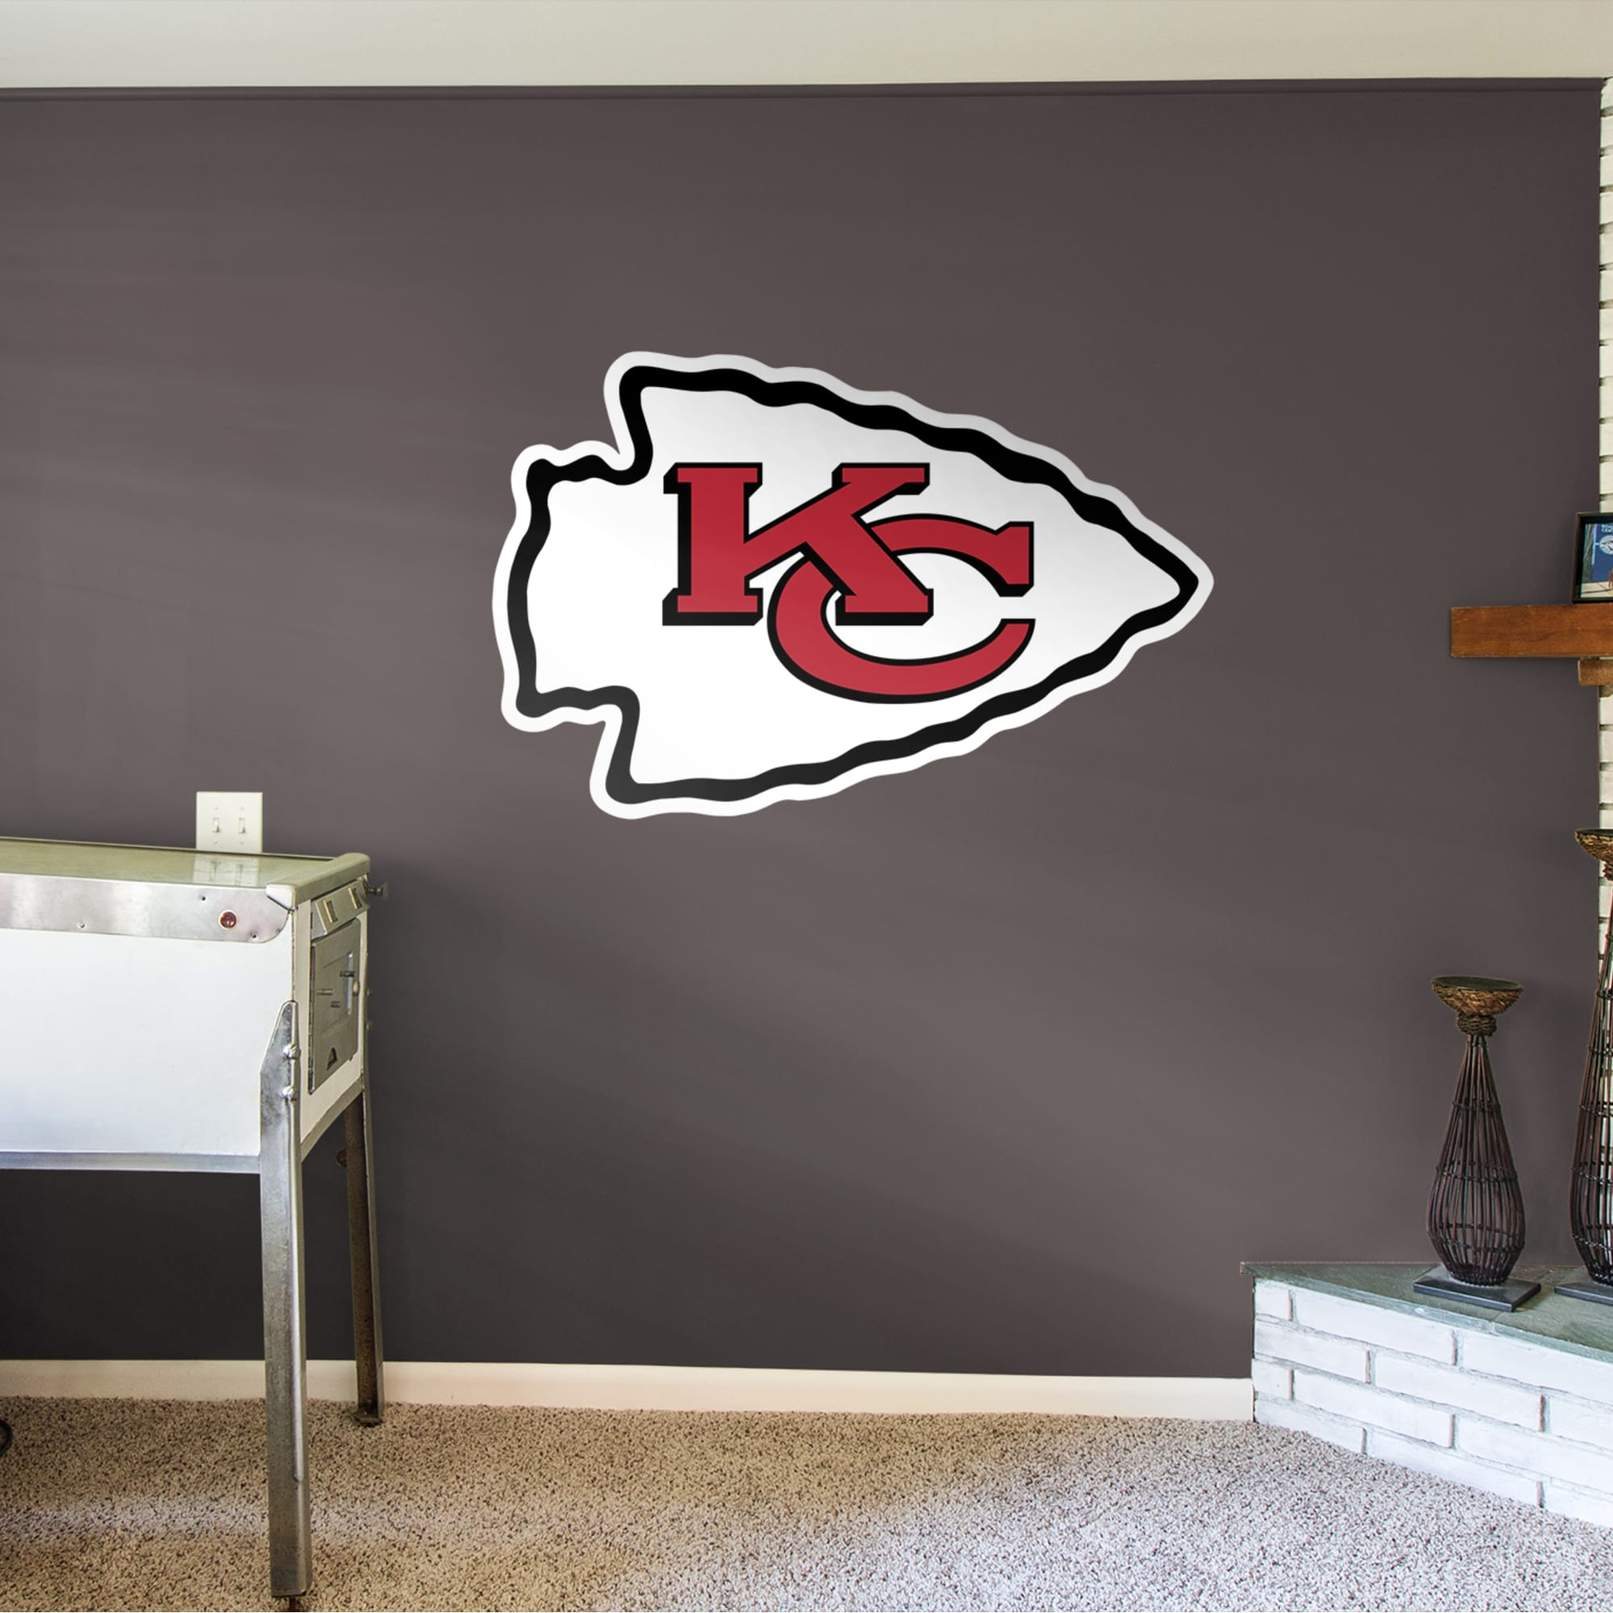 https://fathead.com/collections/nfl